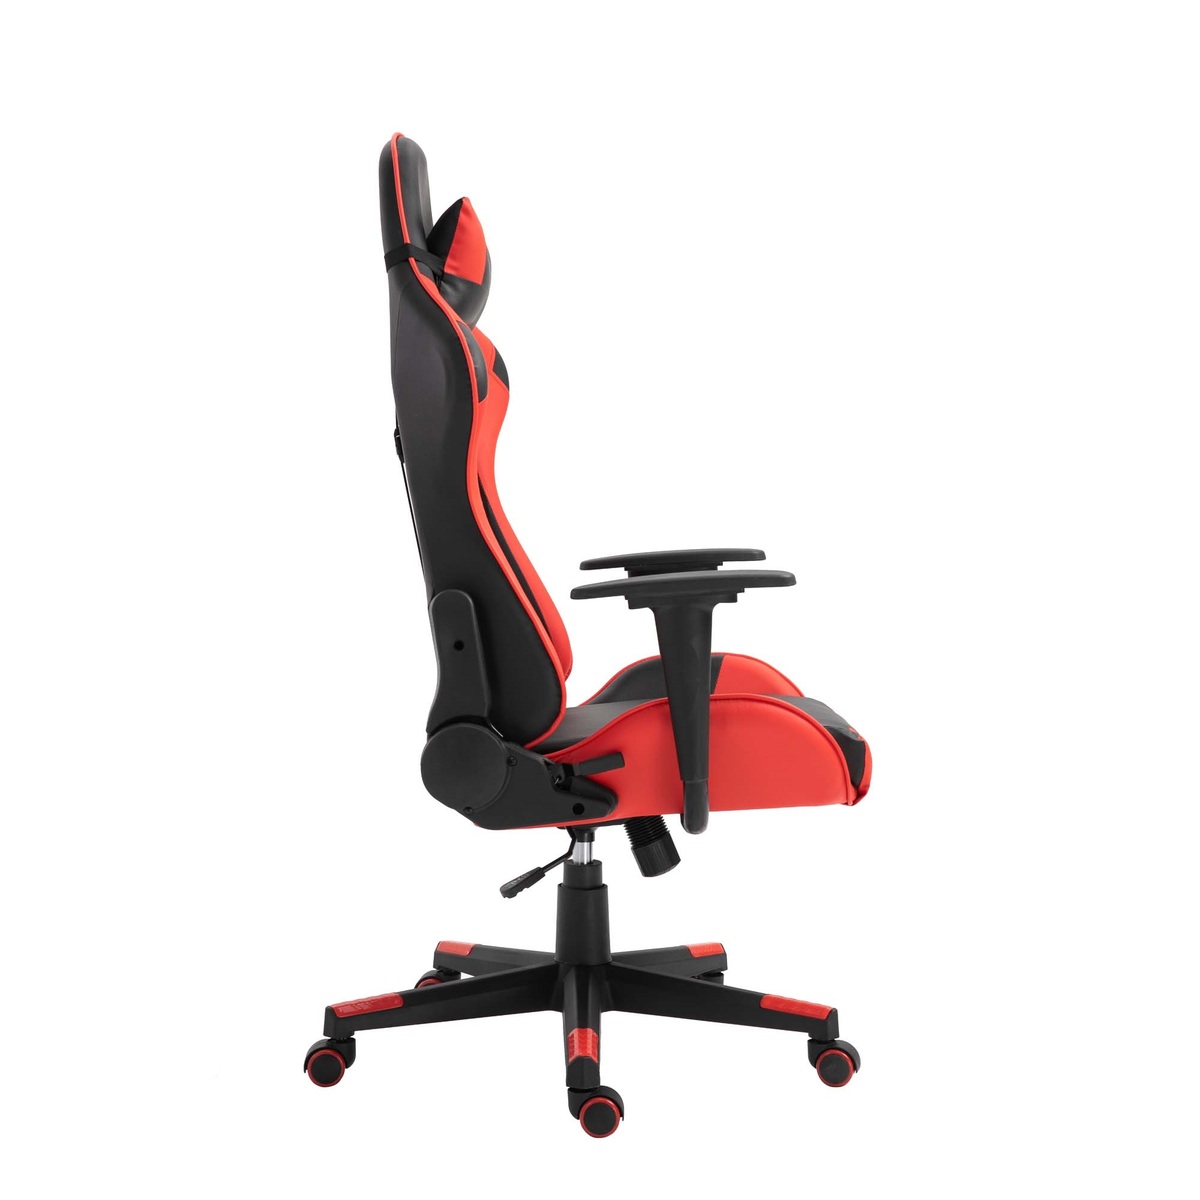 40 Office Scorpion gaming chair price in india for Living Room Wall Decor